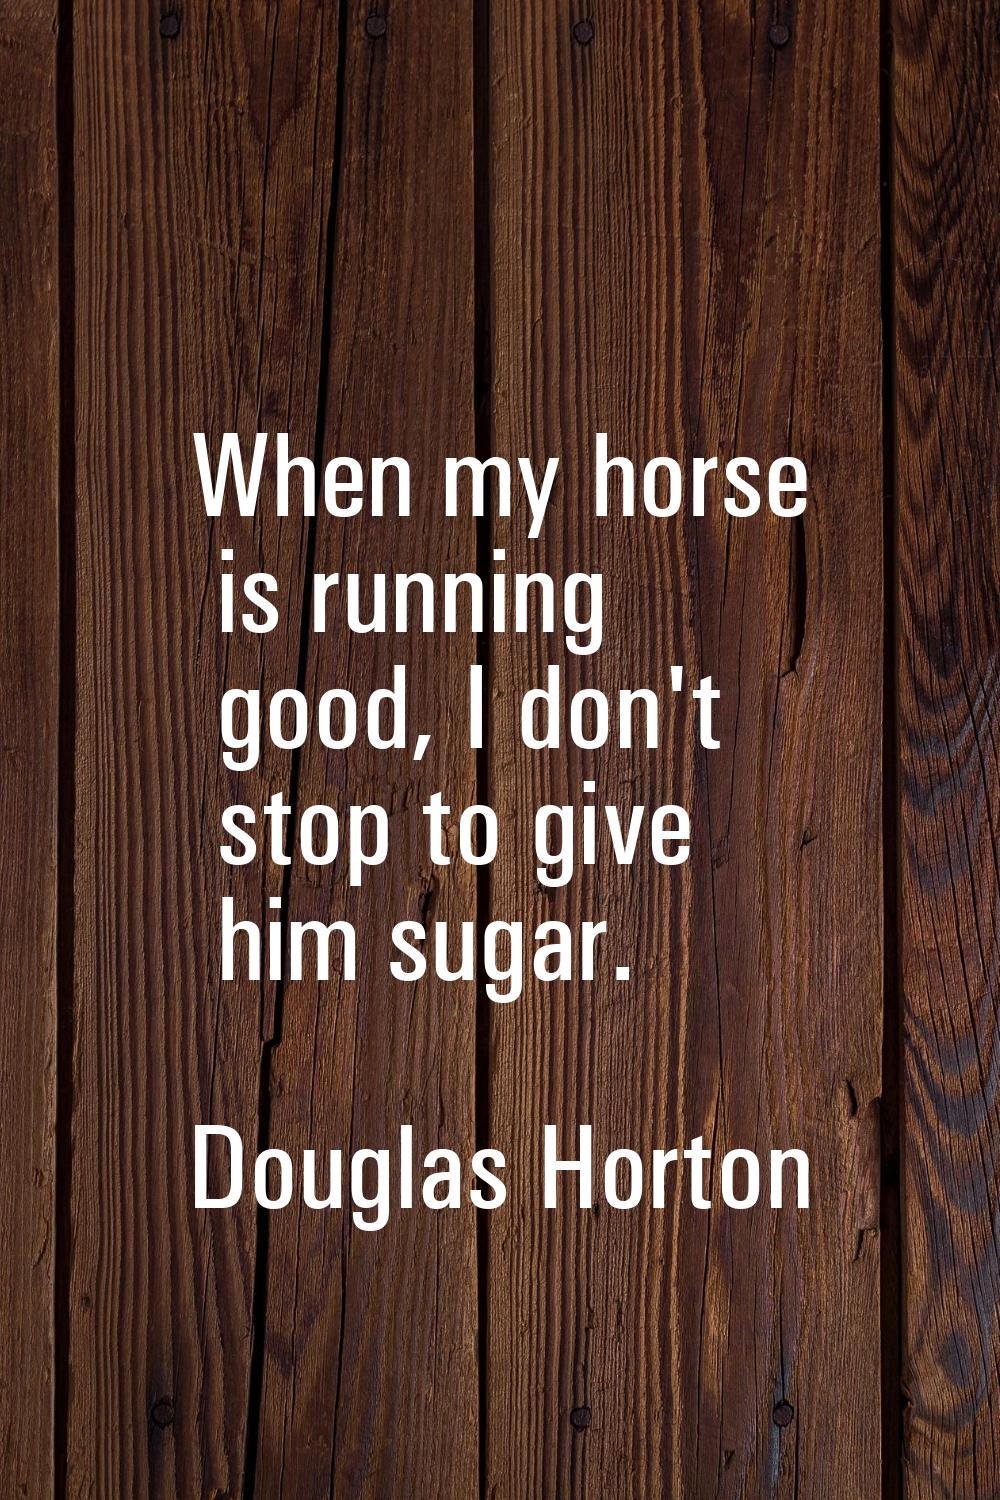 When my horse is running good, I don't stop to give him sugar.